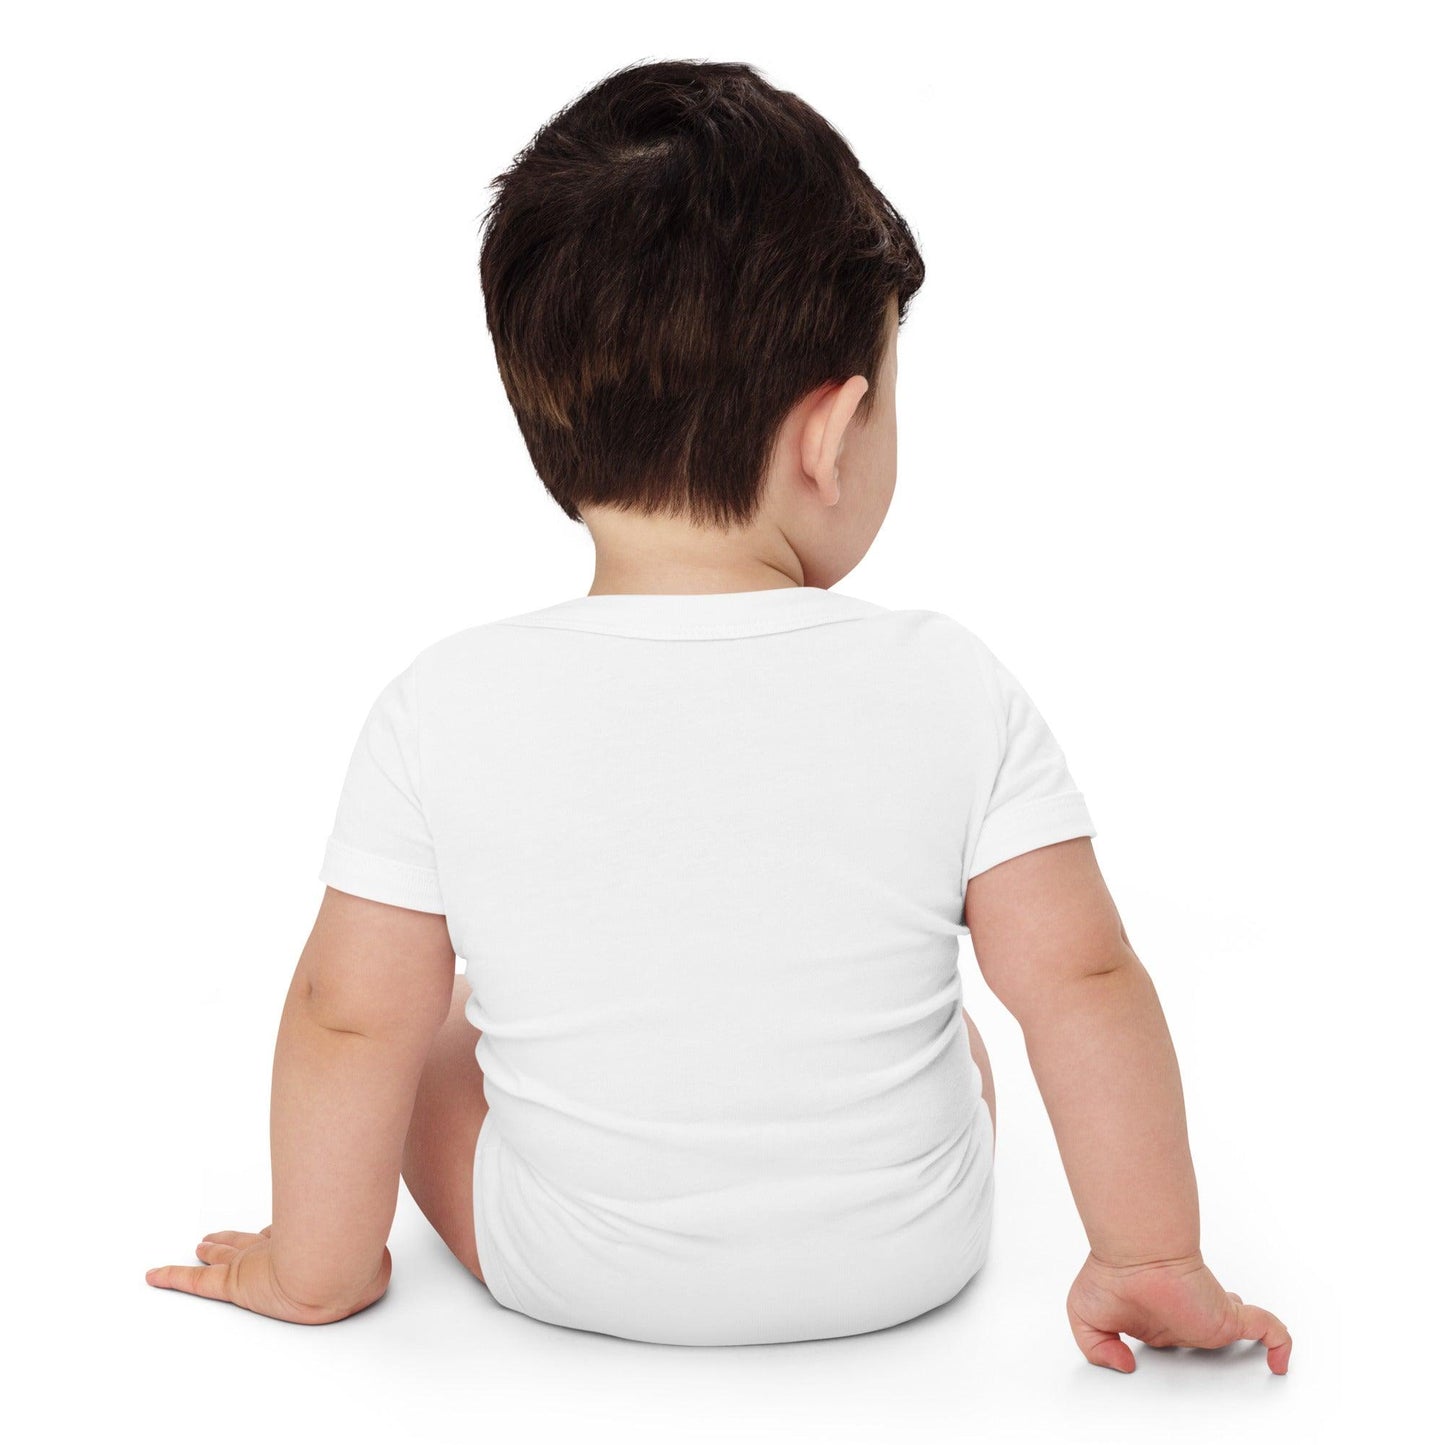 The back of a baby modelling a white baby onesie while in front of a white background